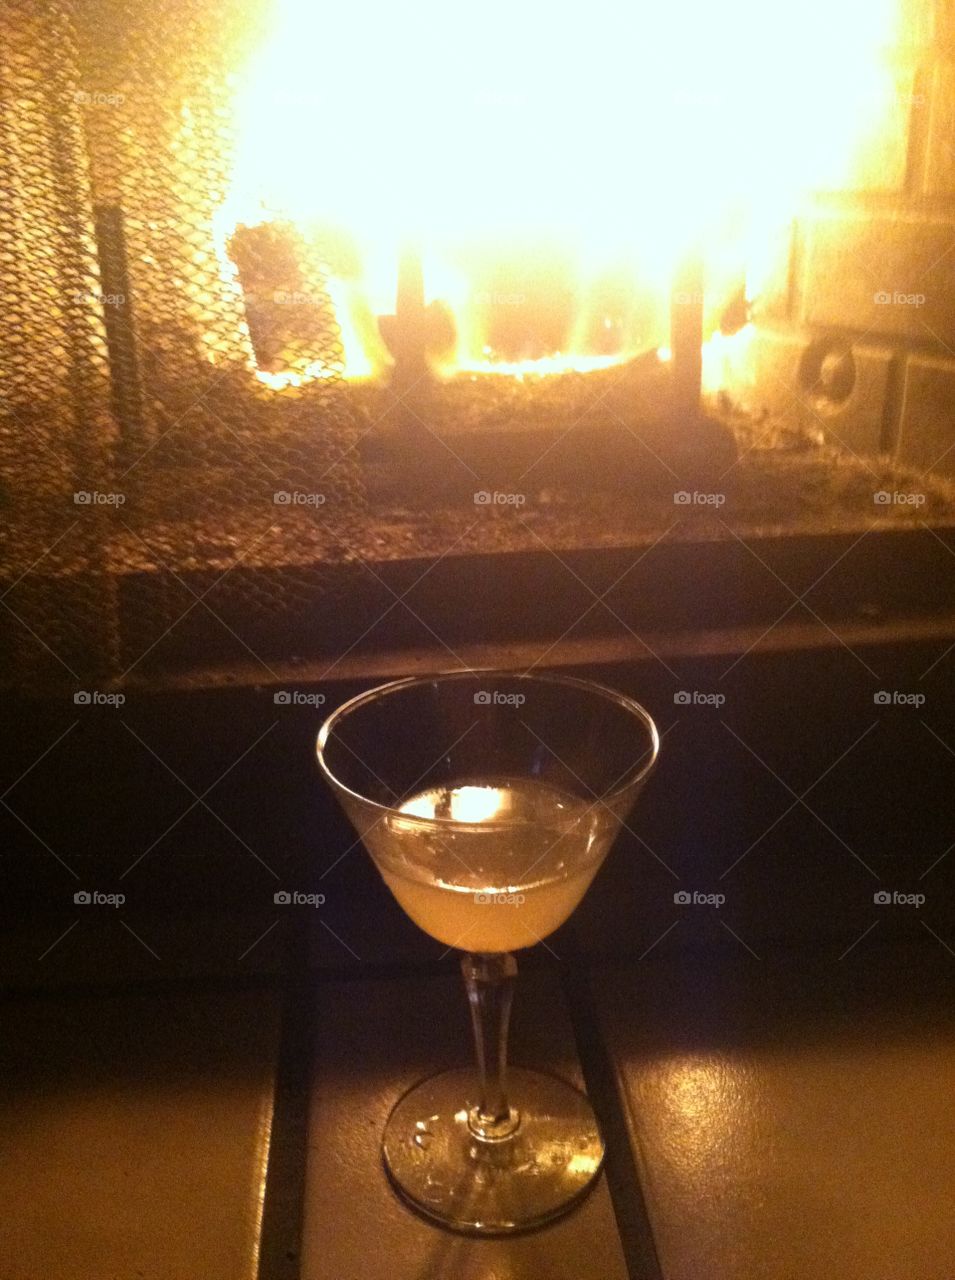 Martini by the fire